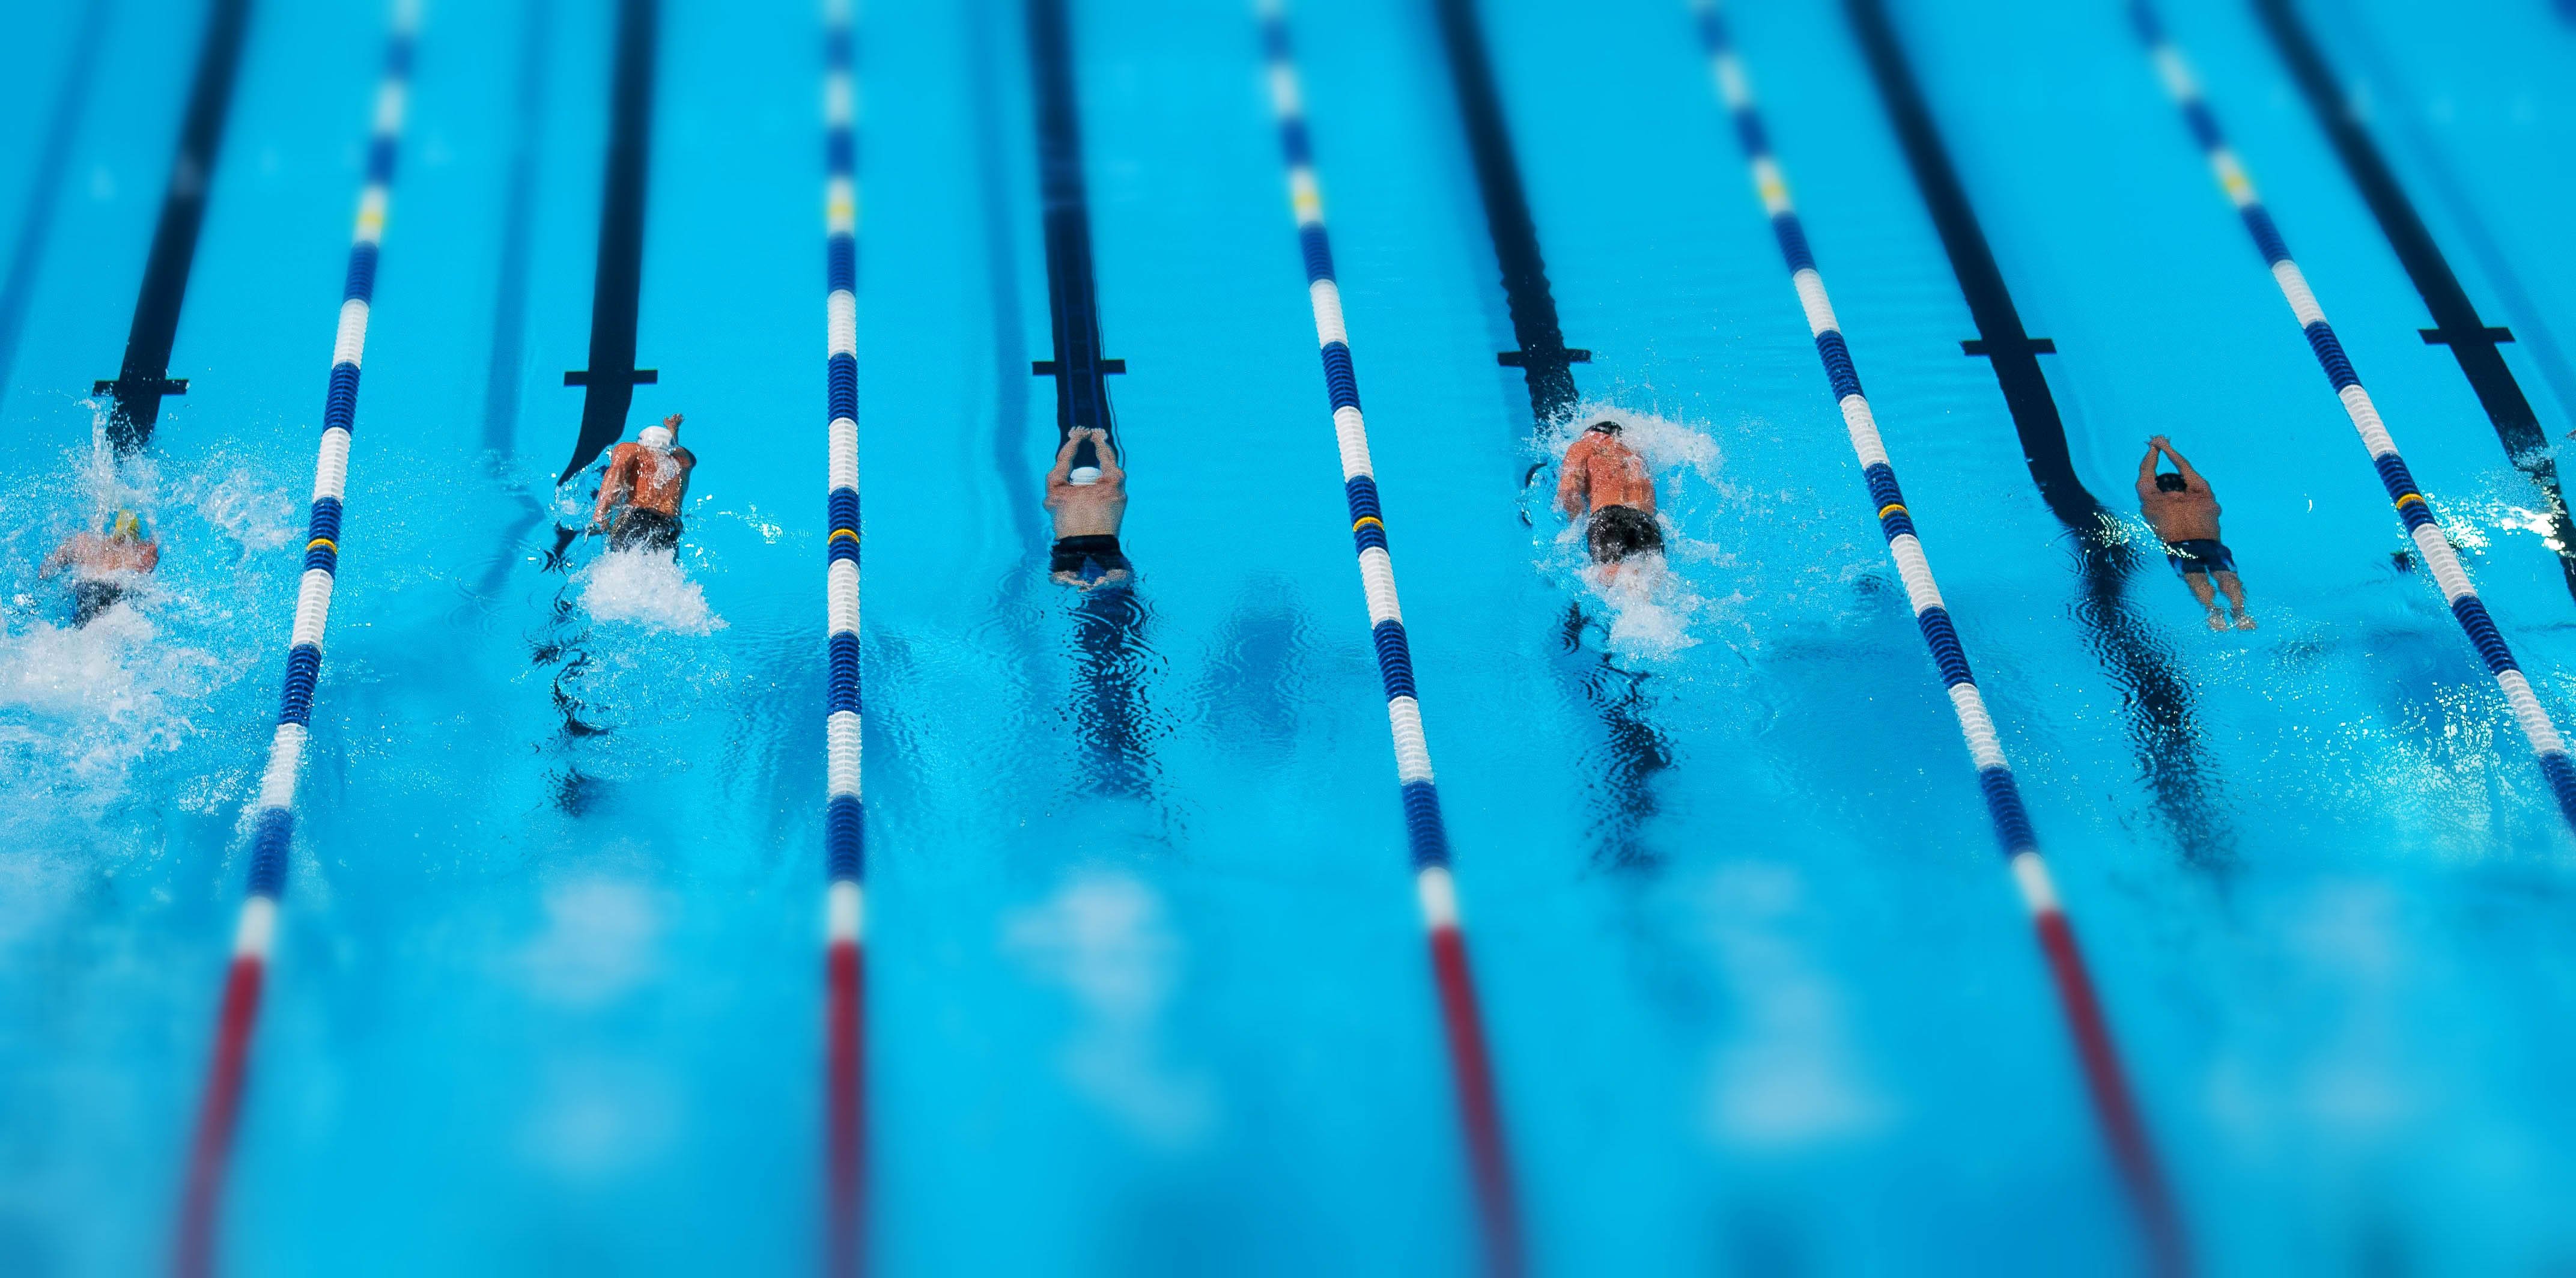 A Group of people participating in a swimming race